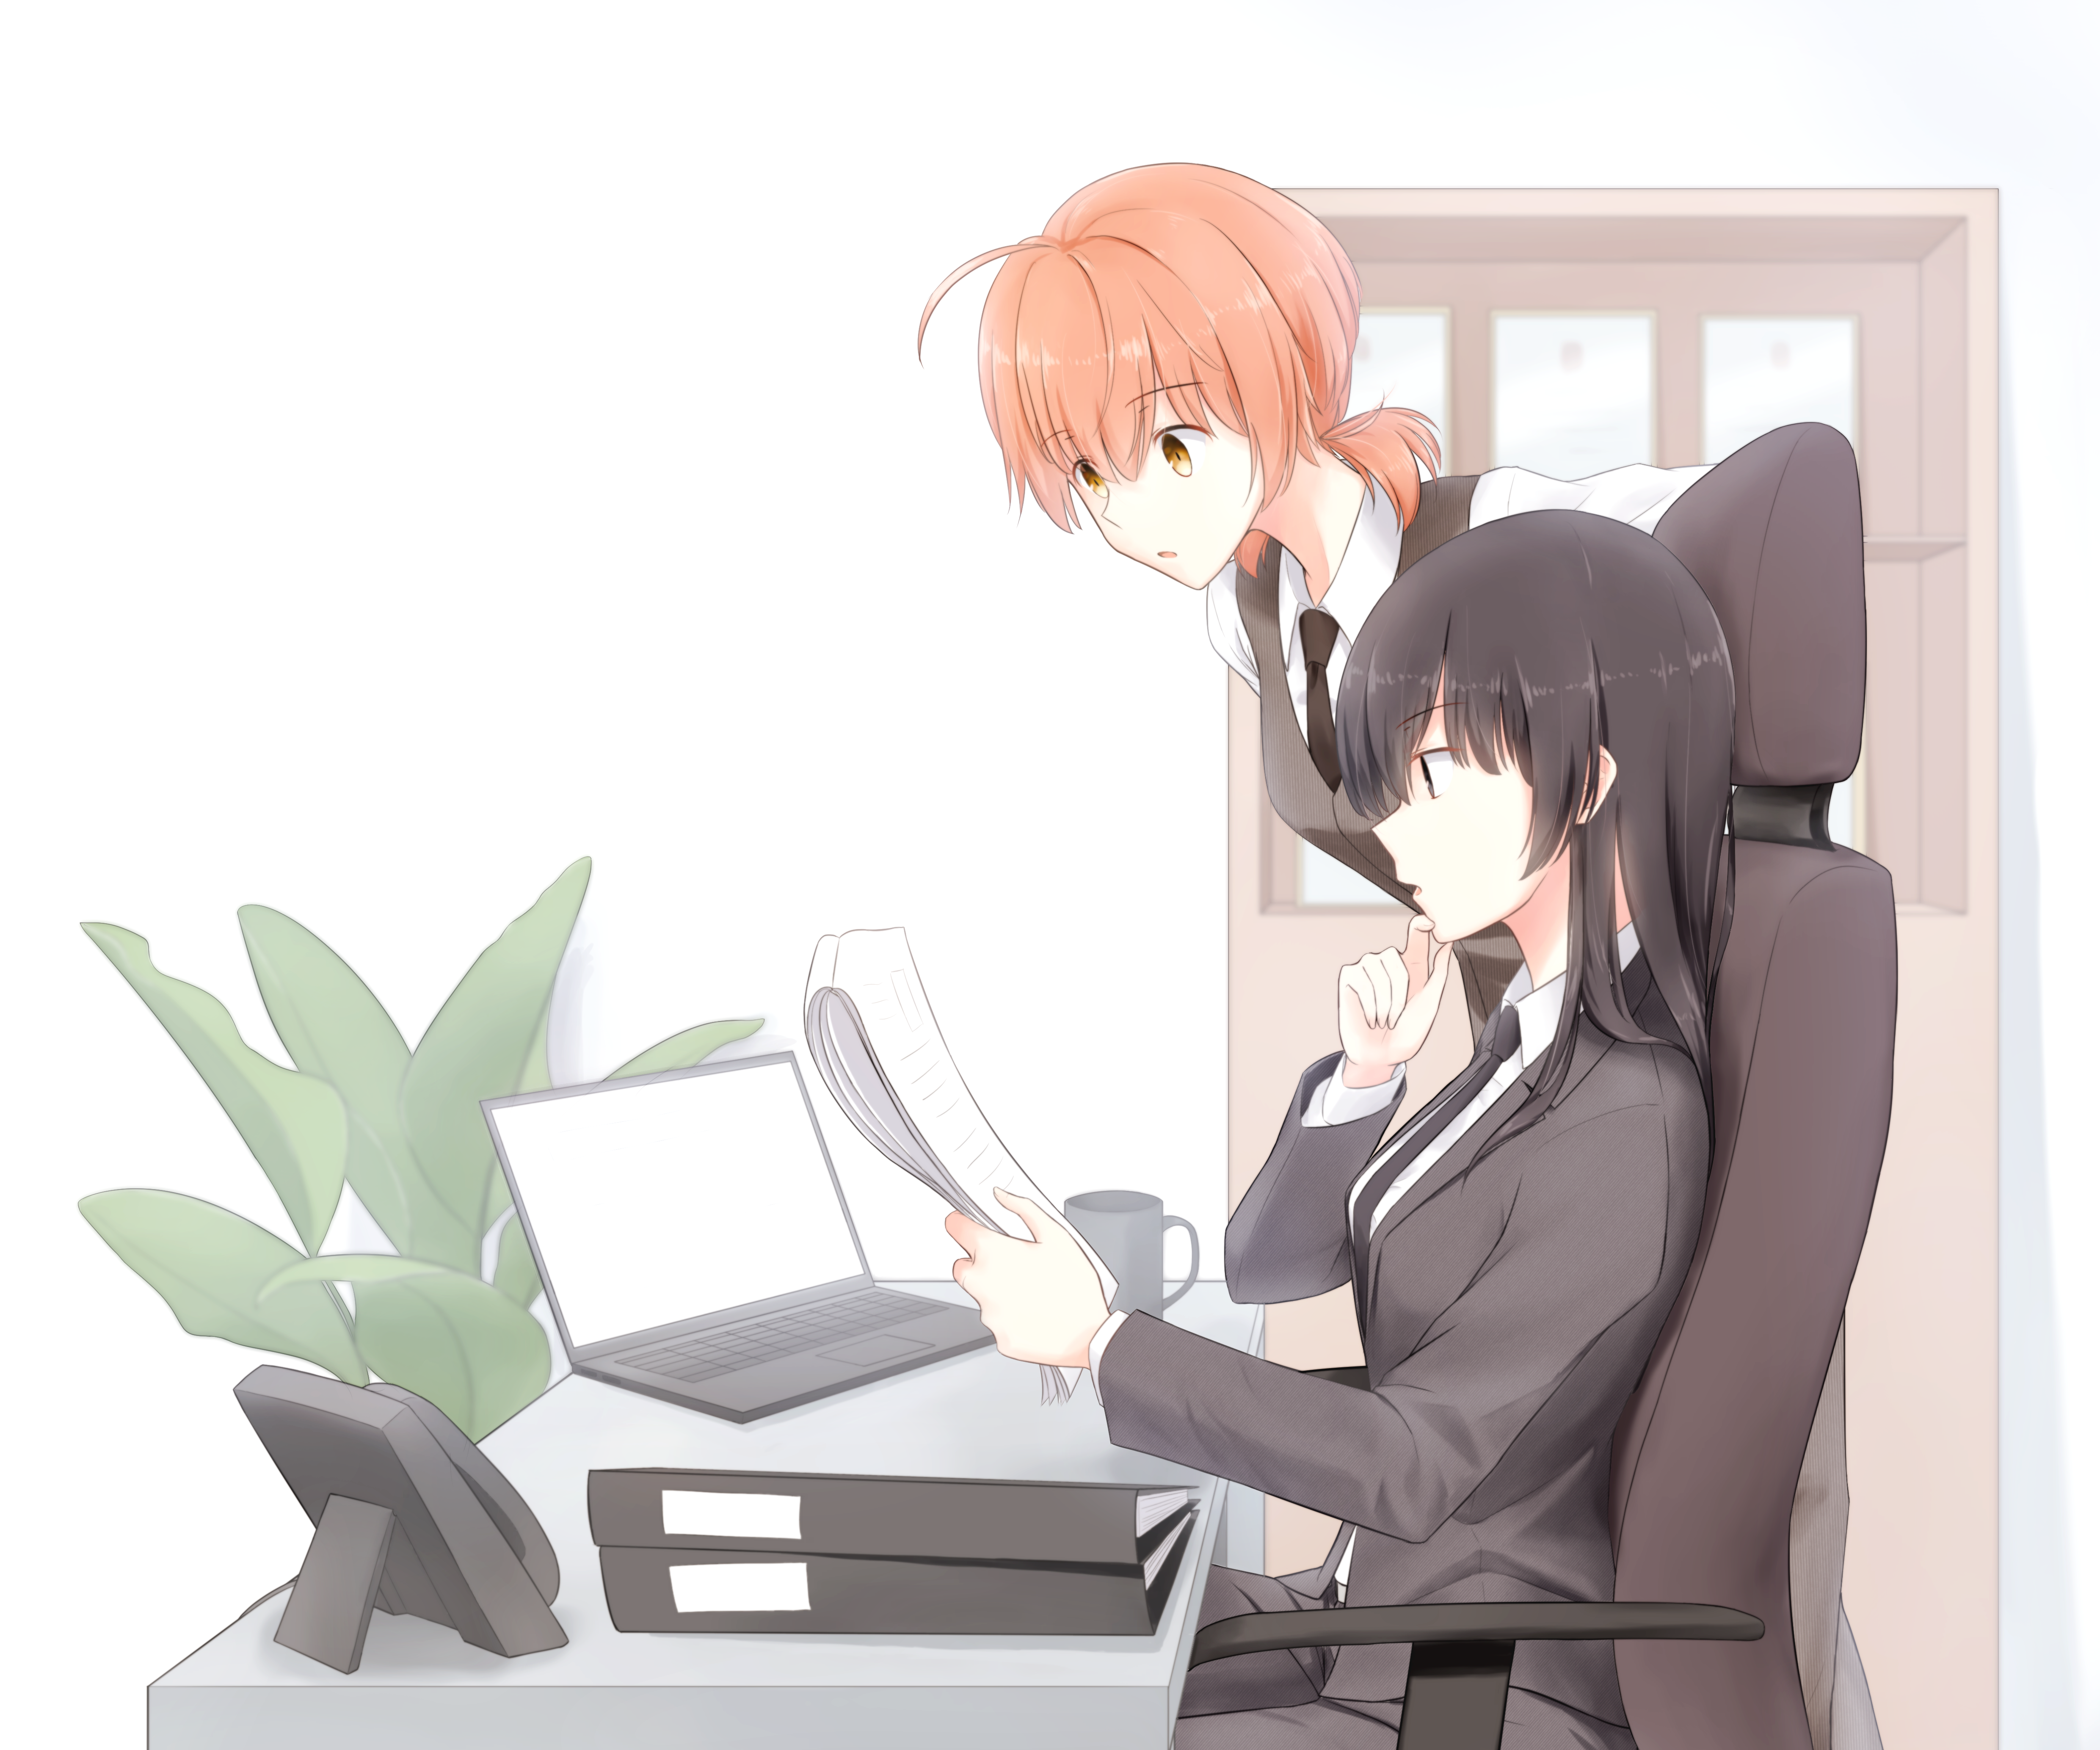 Anime Bloom into You HD Wallpaper | Background Image